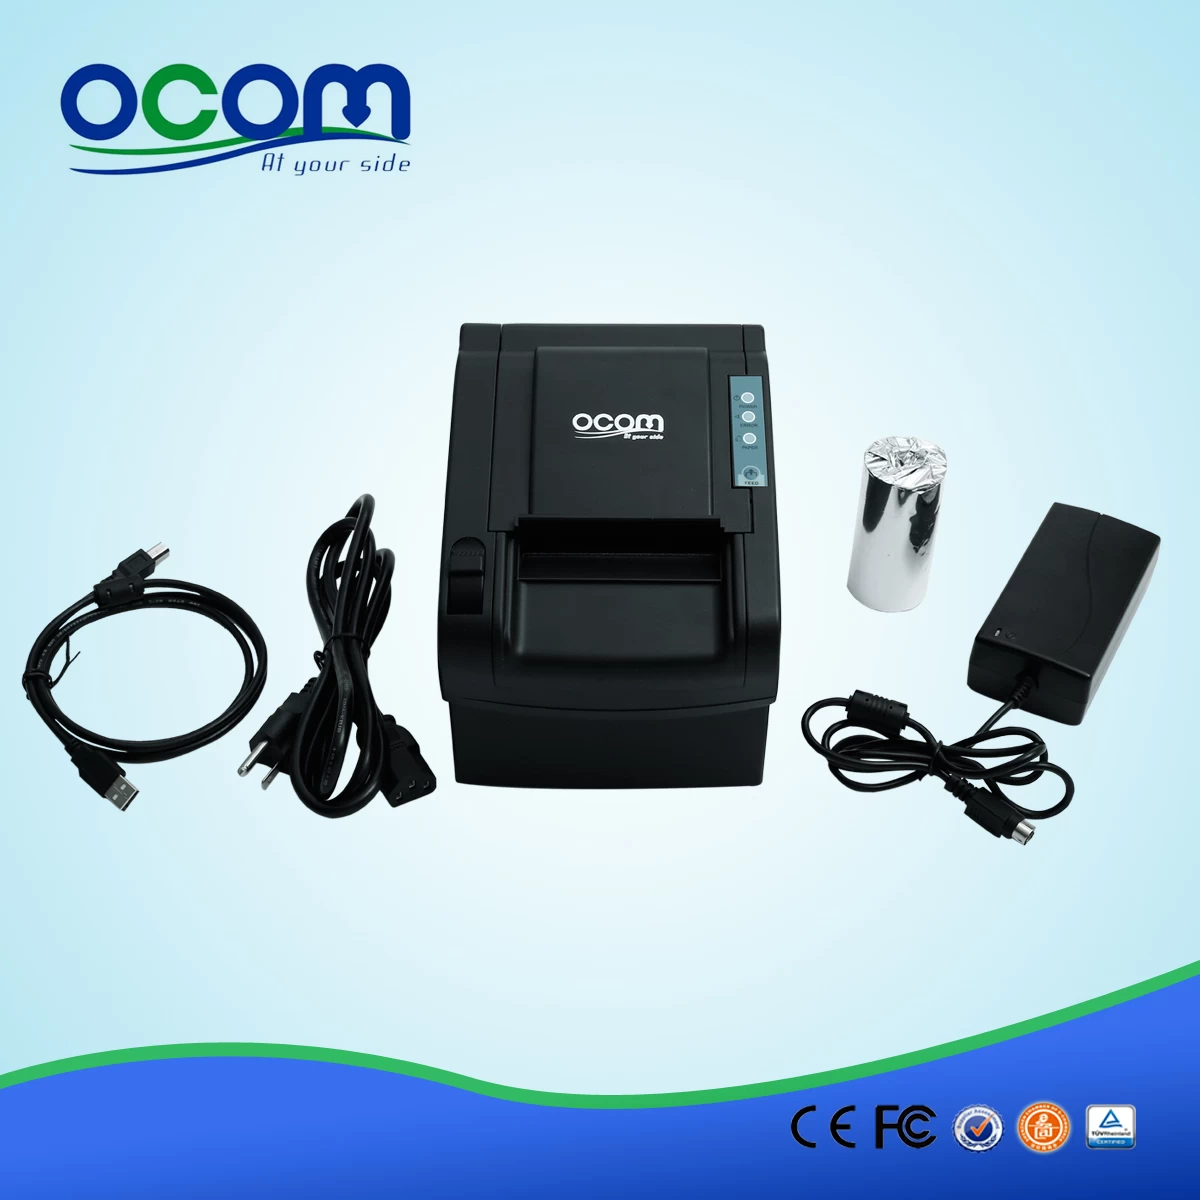 China made low cost  80mm thermal receipt printer-OCPP-802